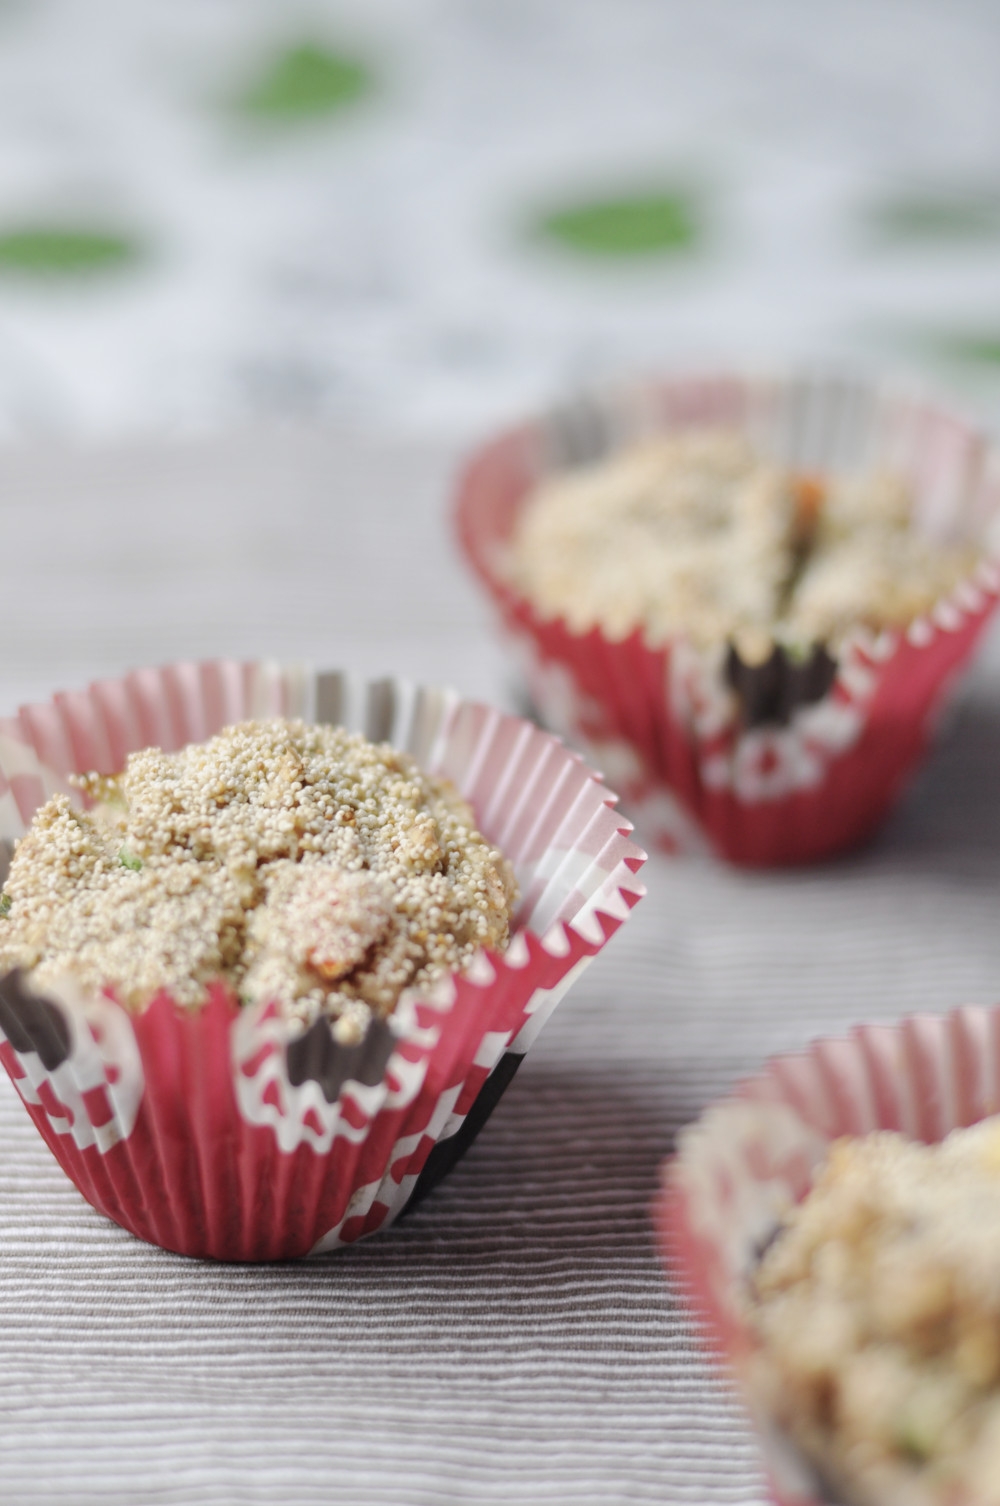 wholewheat vegetables muffins with poppy seeds